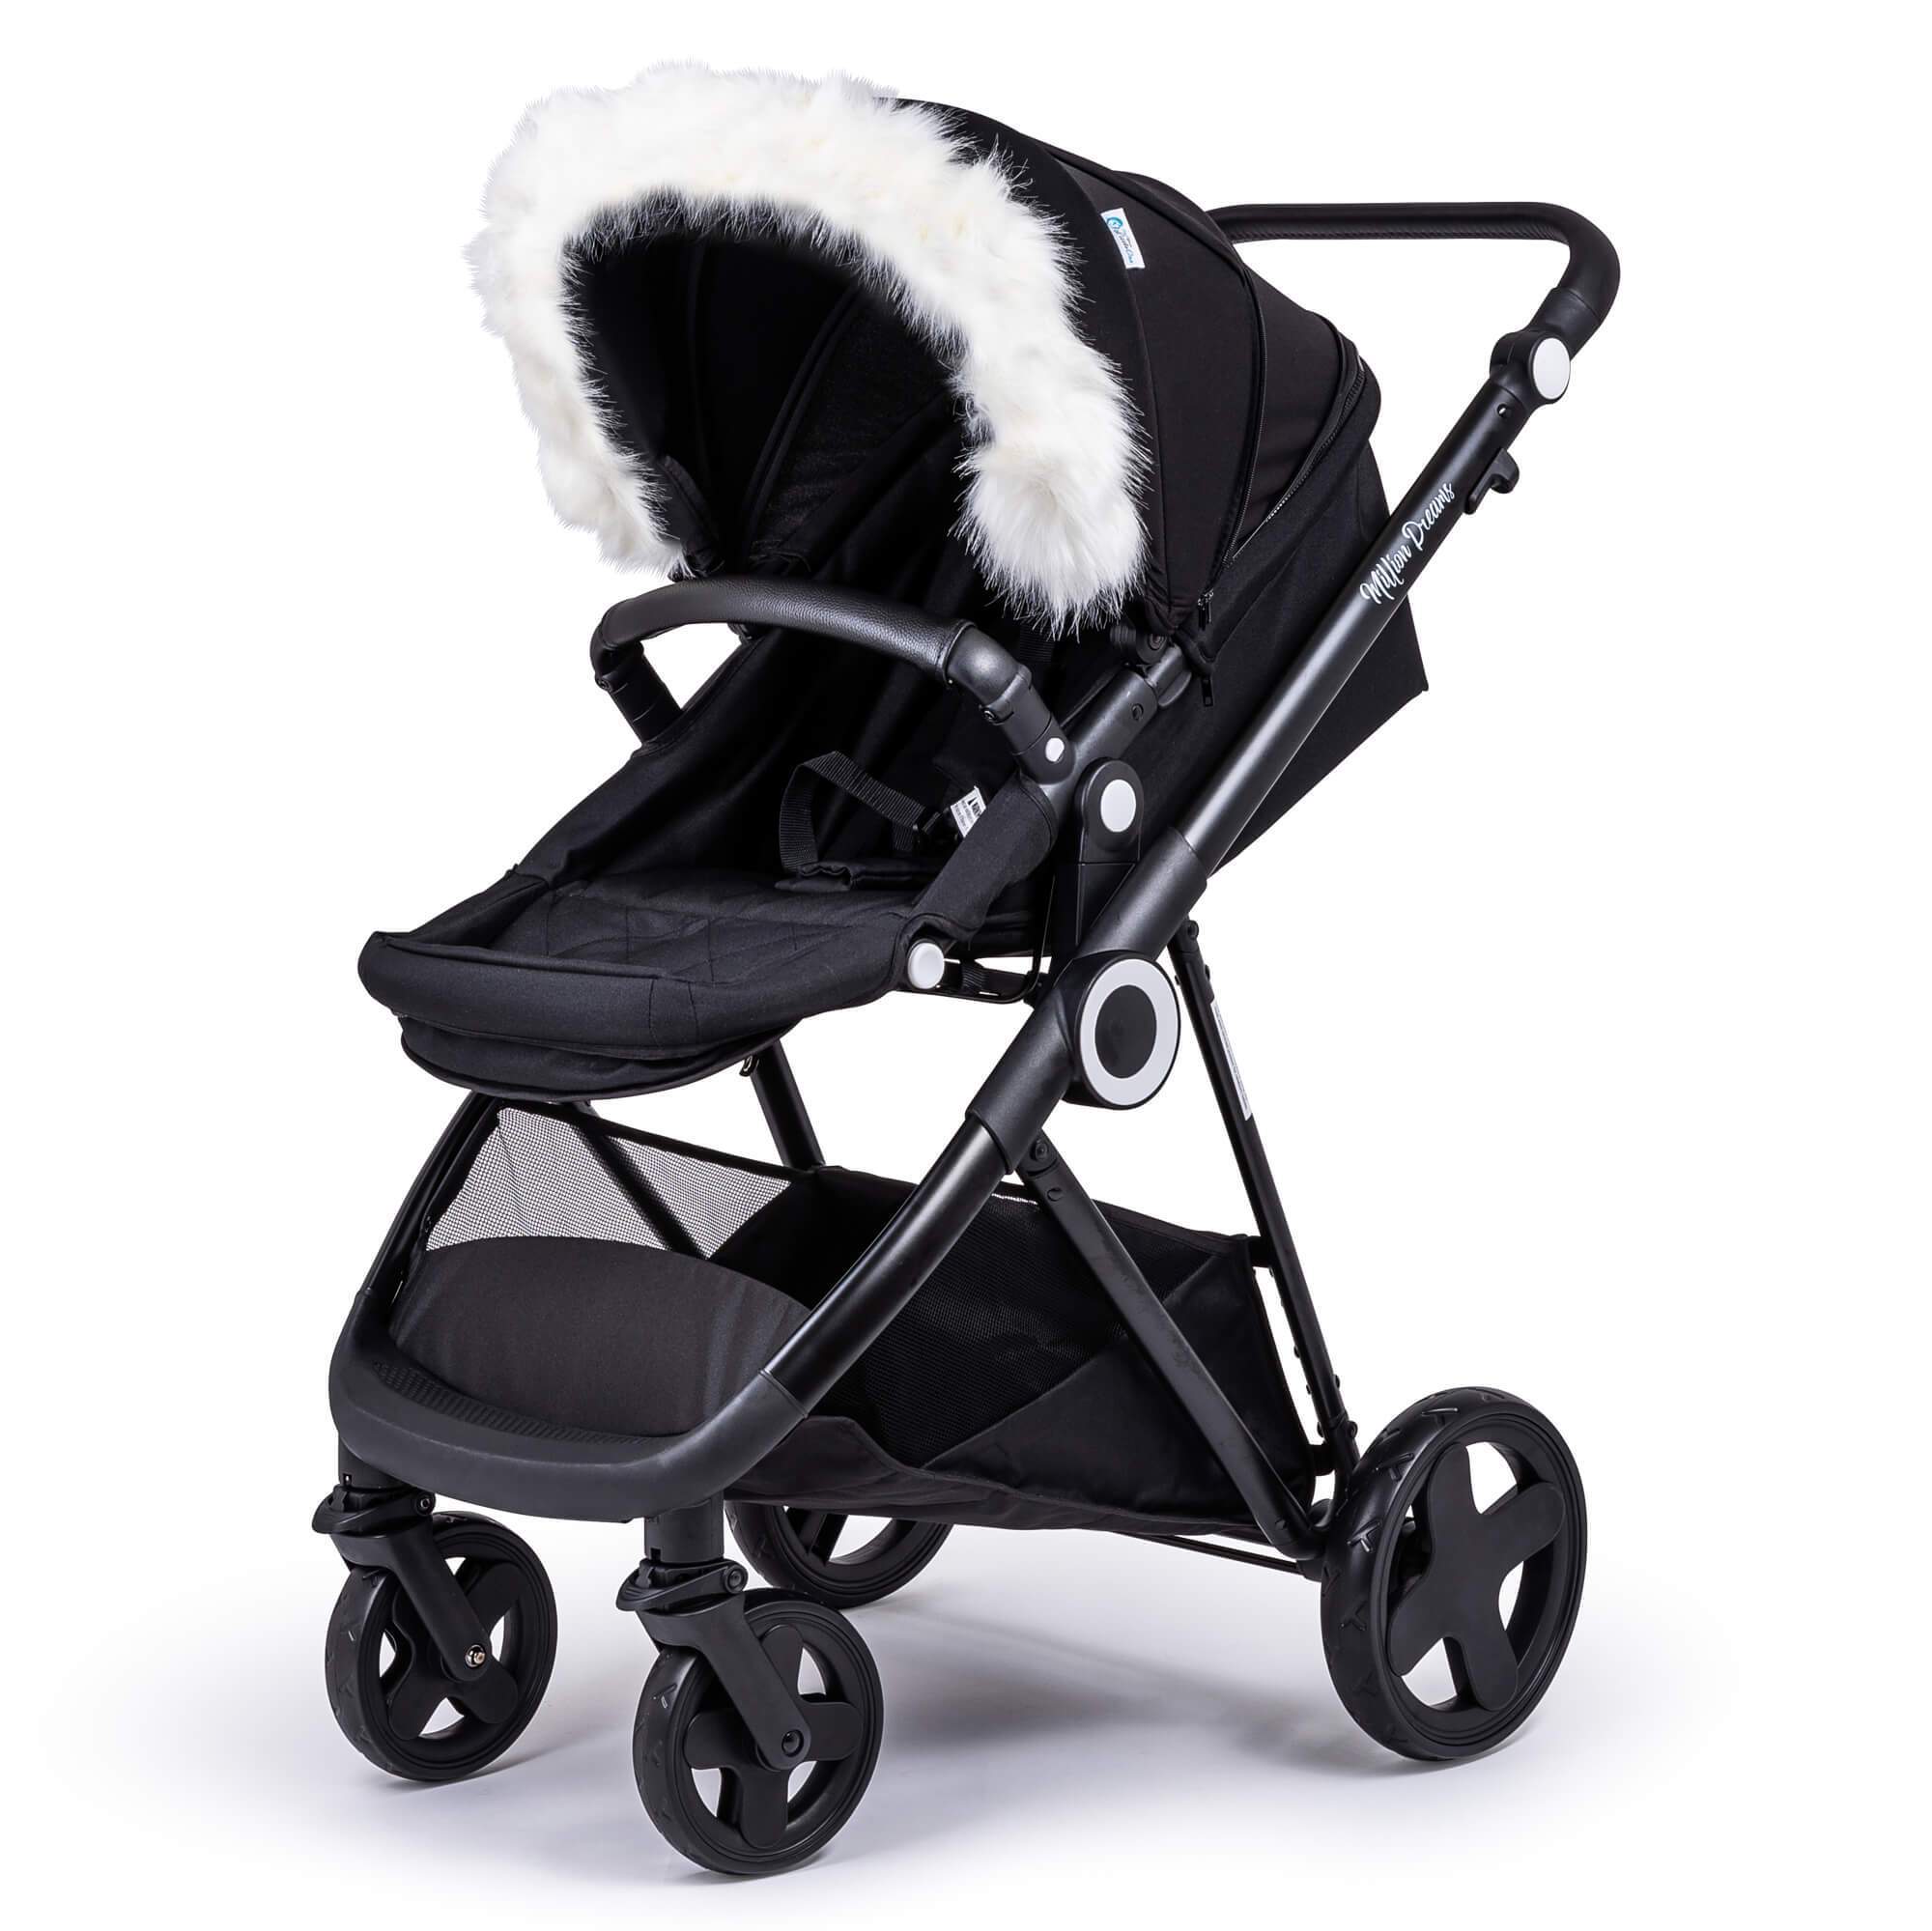 Pram Fur Hood Trim Attachment for Pushchair Compatible with Graco - For Your Little One